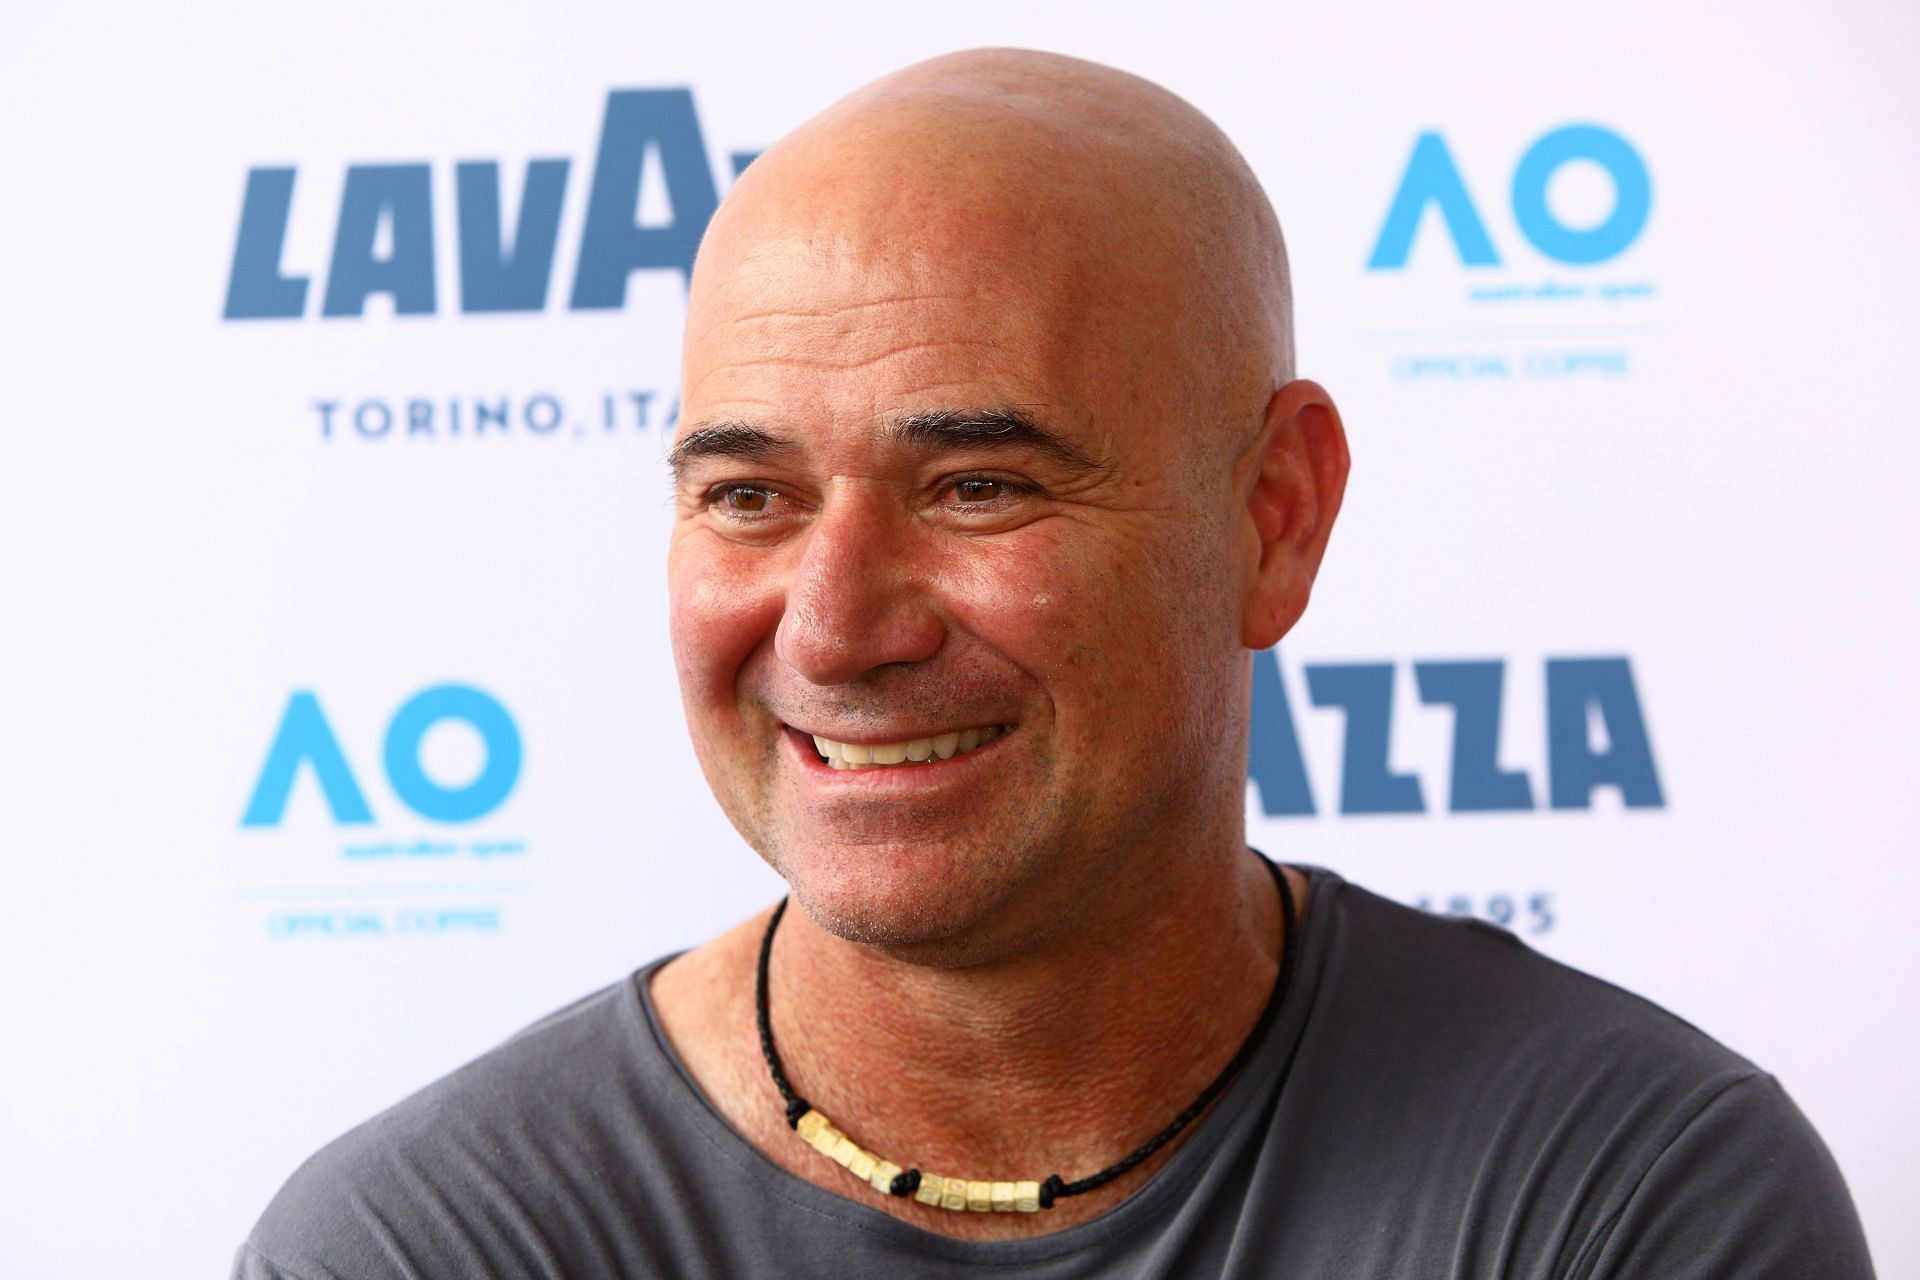 Agassi during an event in 2019